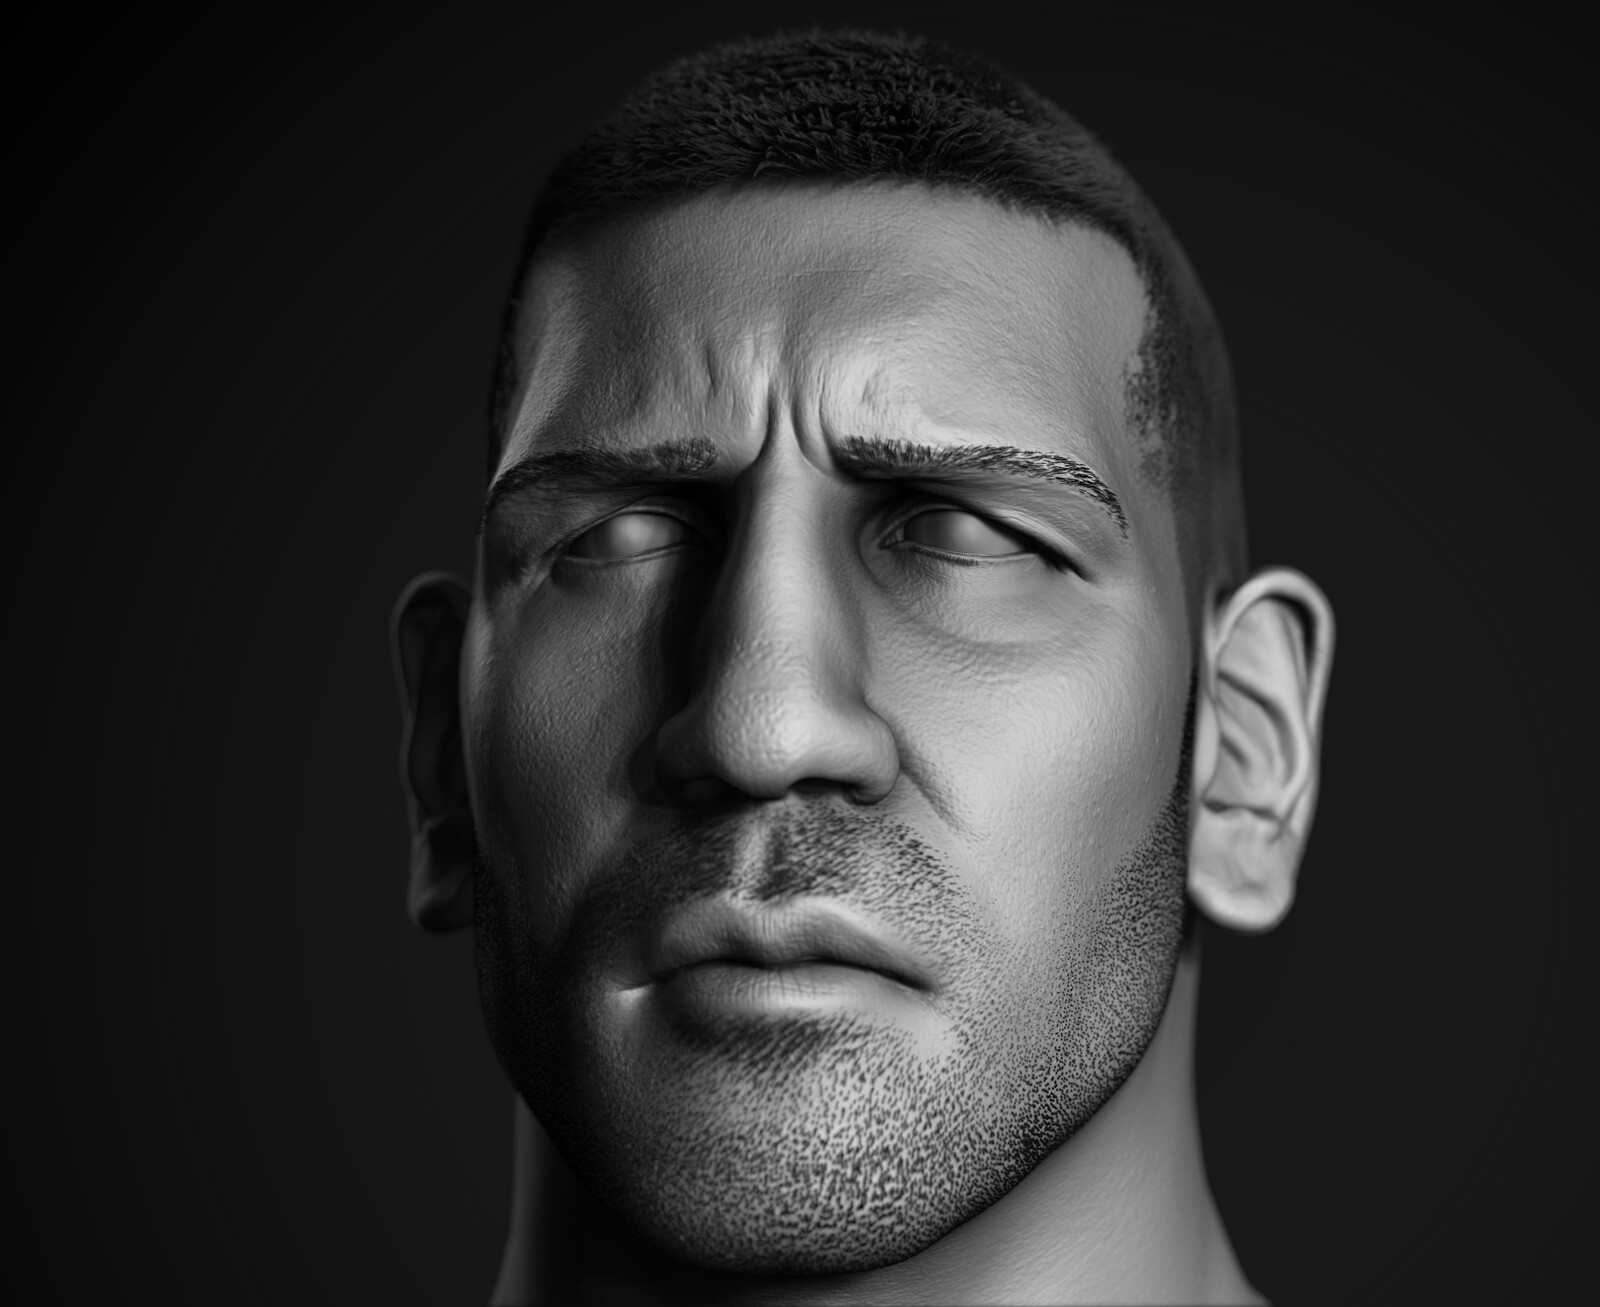 High res sculpt of the face